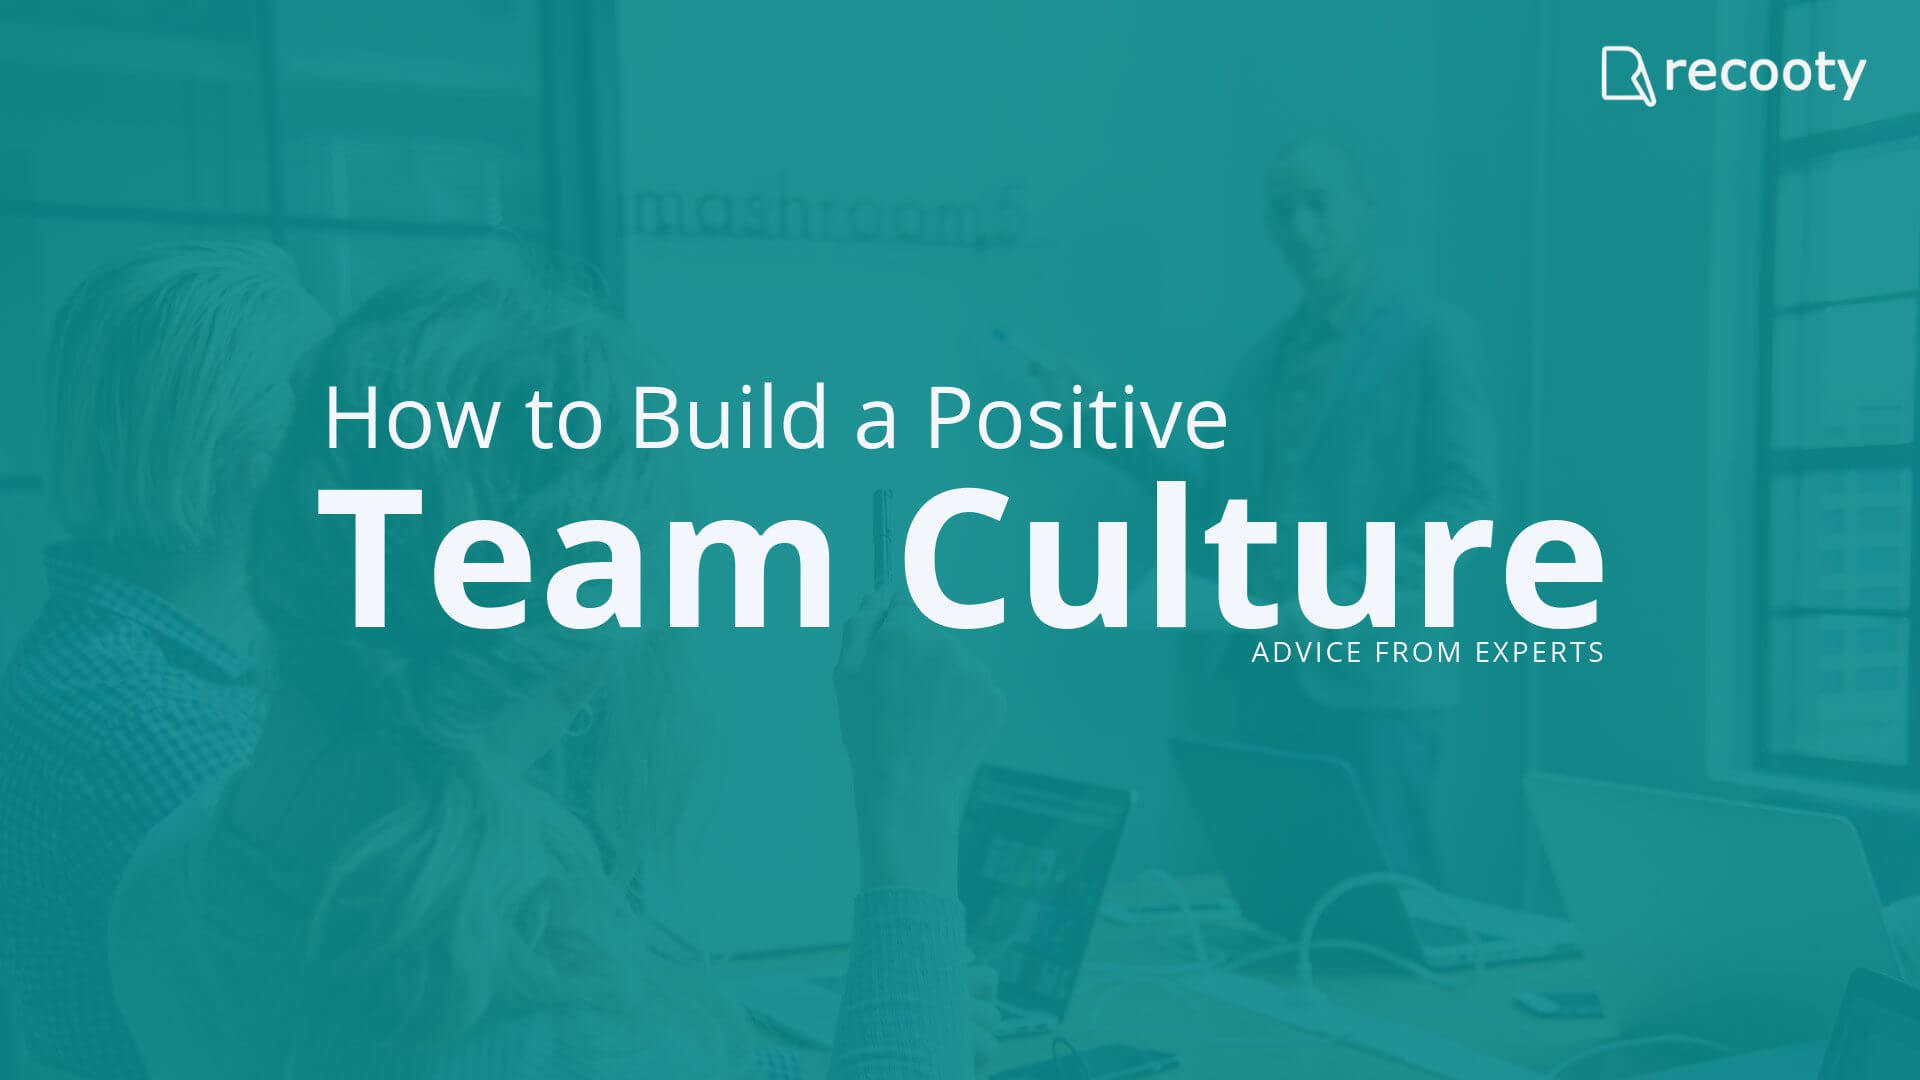 how to build a positive team culture, startup hiring, team culture, hiring trends, team bonding, team building, positive workplace, workplace environment.